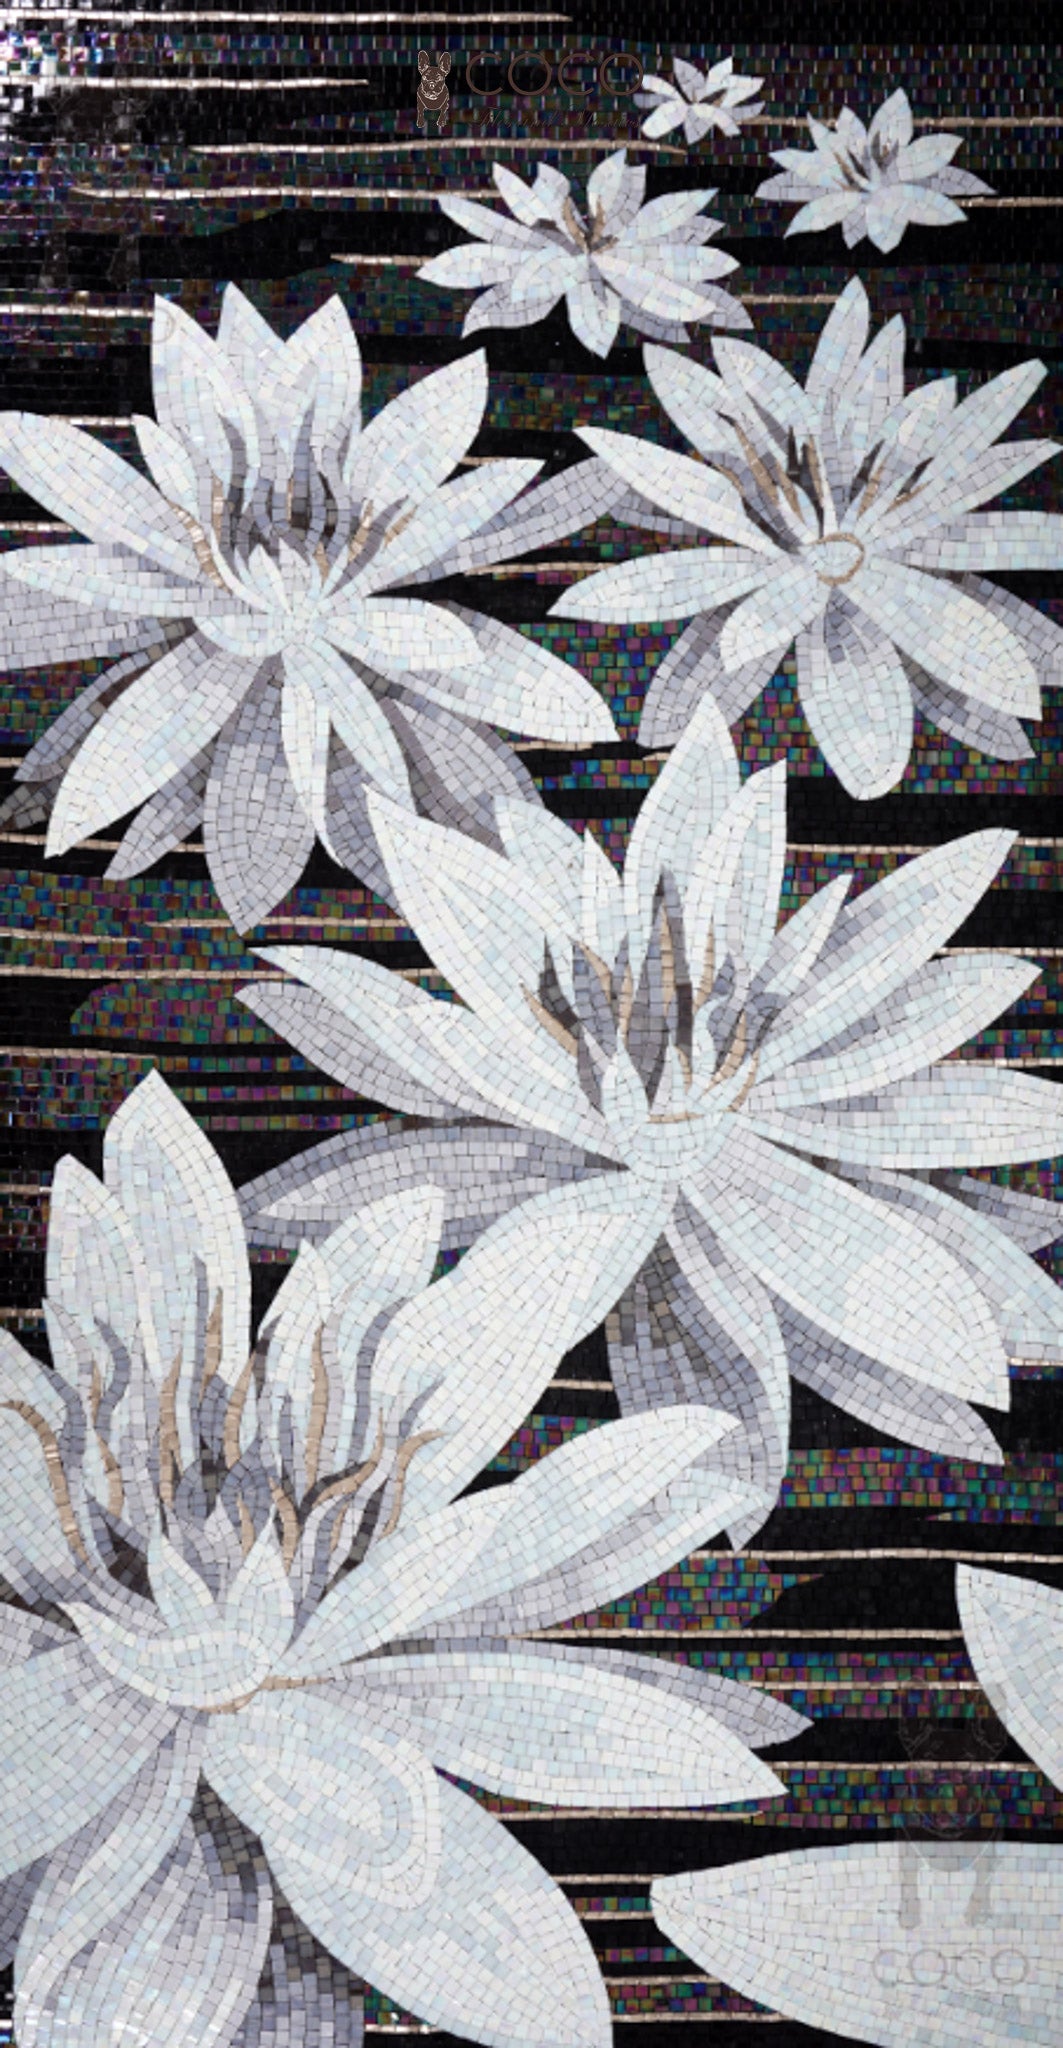 Artistic Mosaic - Water Lilies - Great Beauty